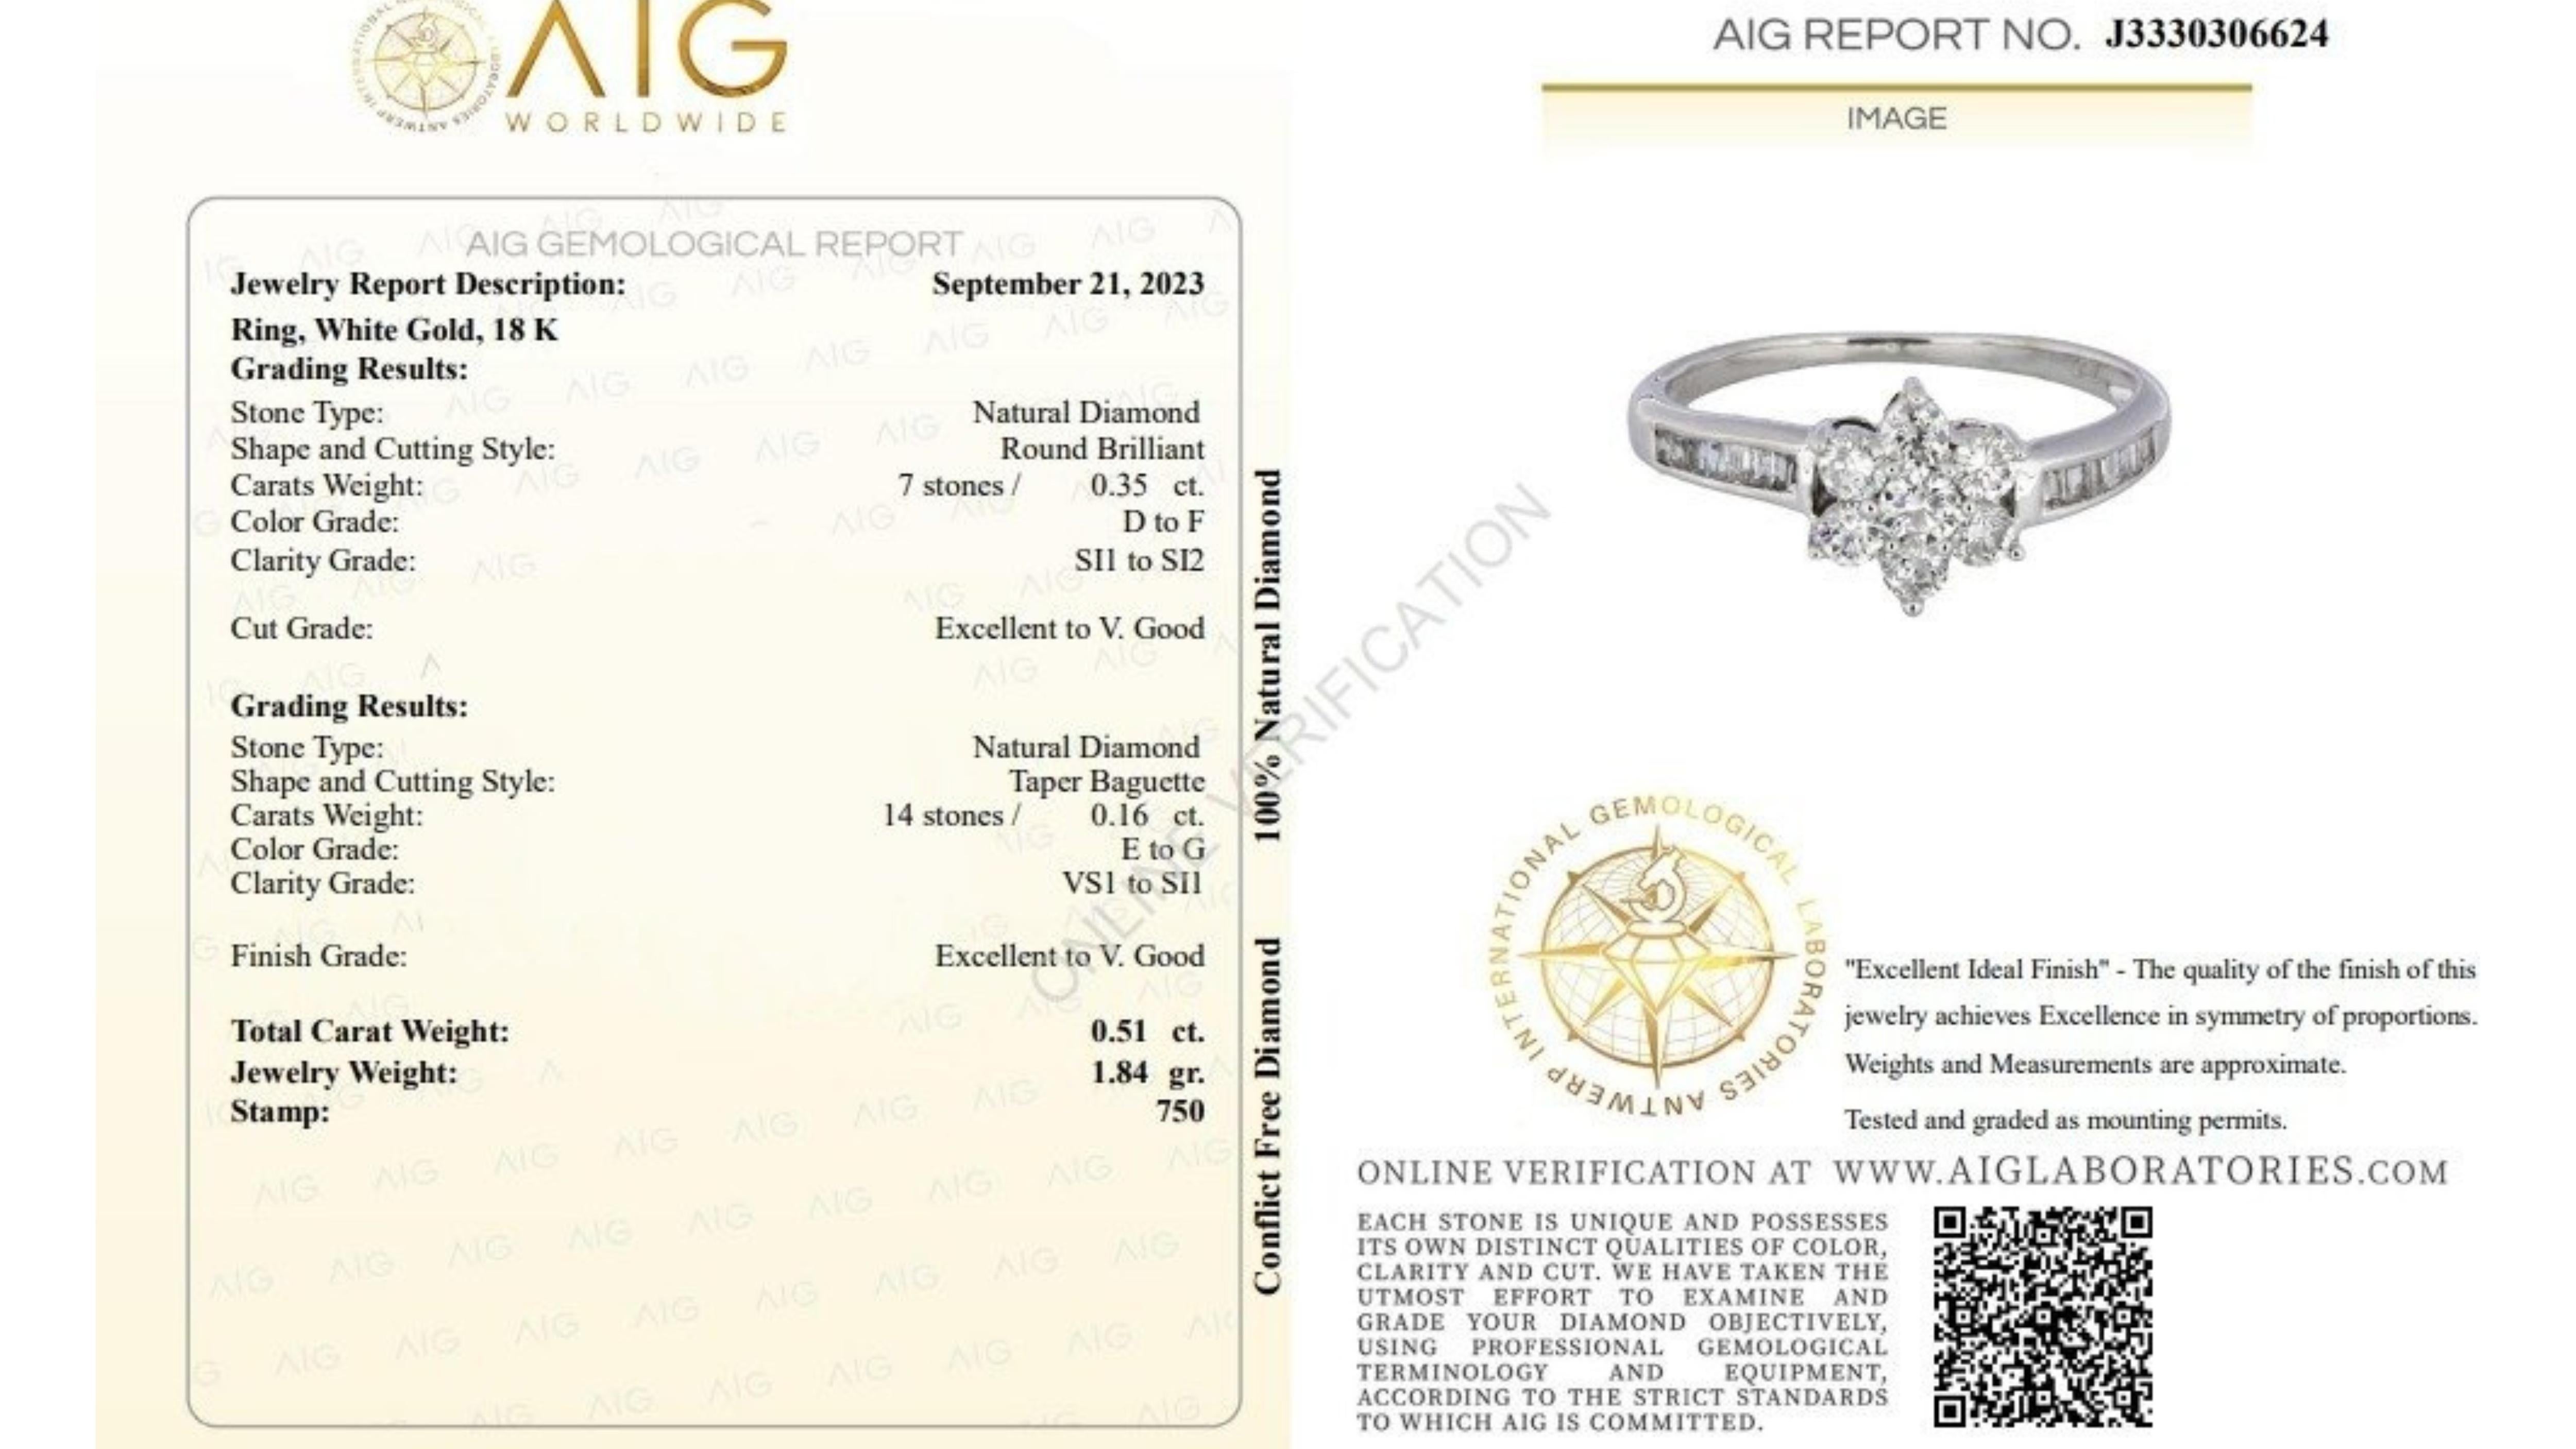 This lovely flower ring features a dazzling 0.45 carat marquise natural diamond, set in a beautiful flower motif. The ring is crafted in 18K white gold and has a high quality polish. It comes with an AIG certificate and a nice jewelry box.

The